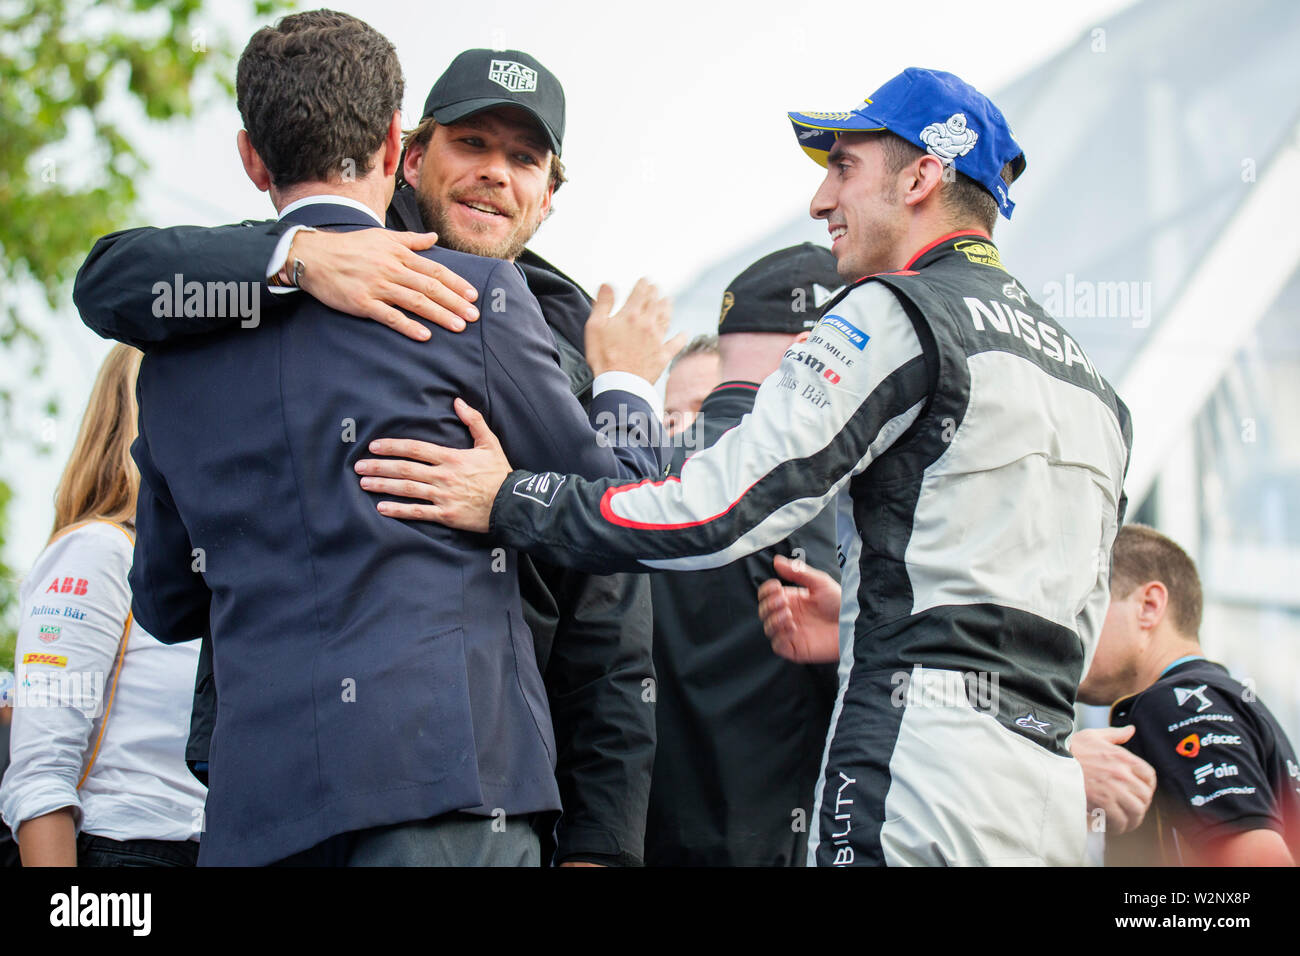 Carl Gurdjian and Sebastien Buemi at the award ceremony following the Julius Baer Formula E Championship race in Bern. The swiss driver Sebastien Buemi, who is at the end of his contract with Nissan, came in third in the race. Stock Photo